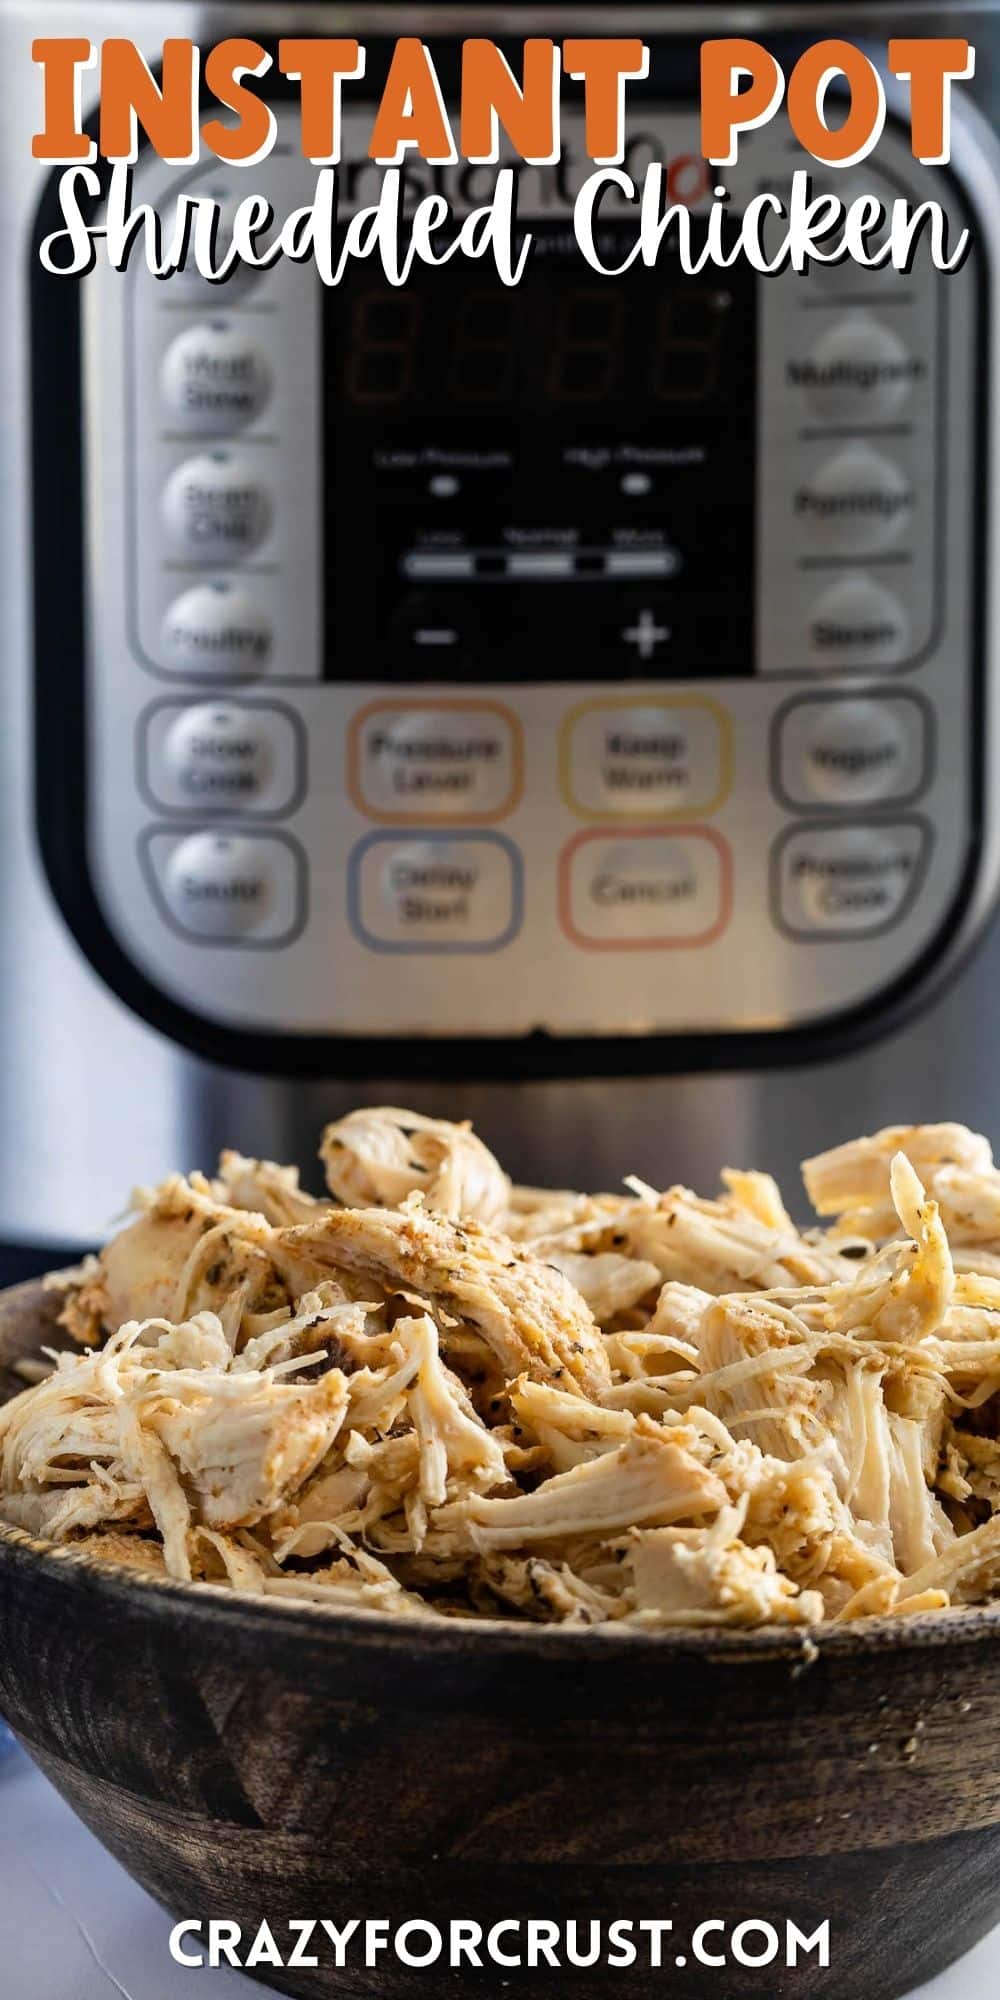 shredded chicken in a brown bowl with an instant pot behind and words on top of the image